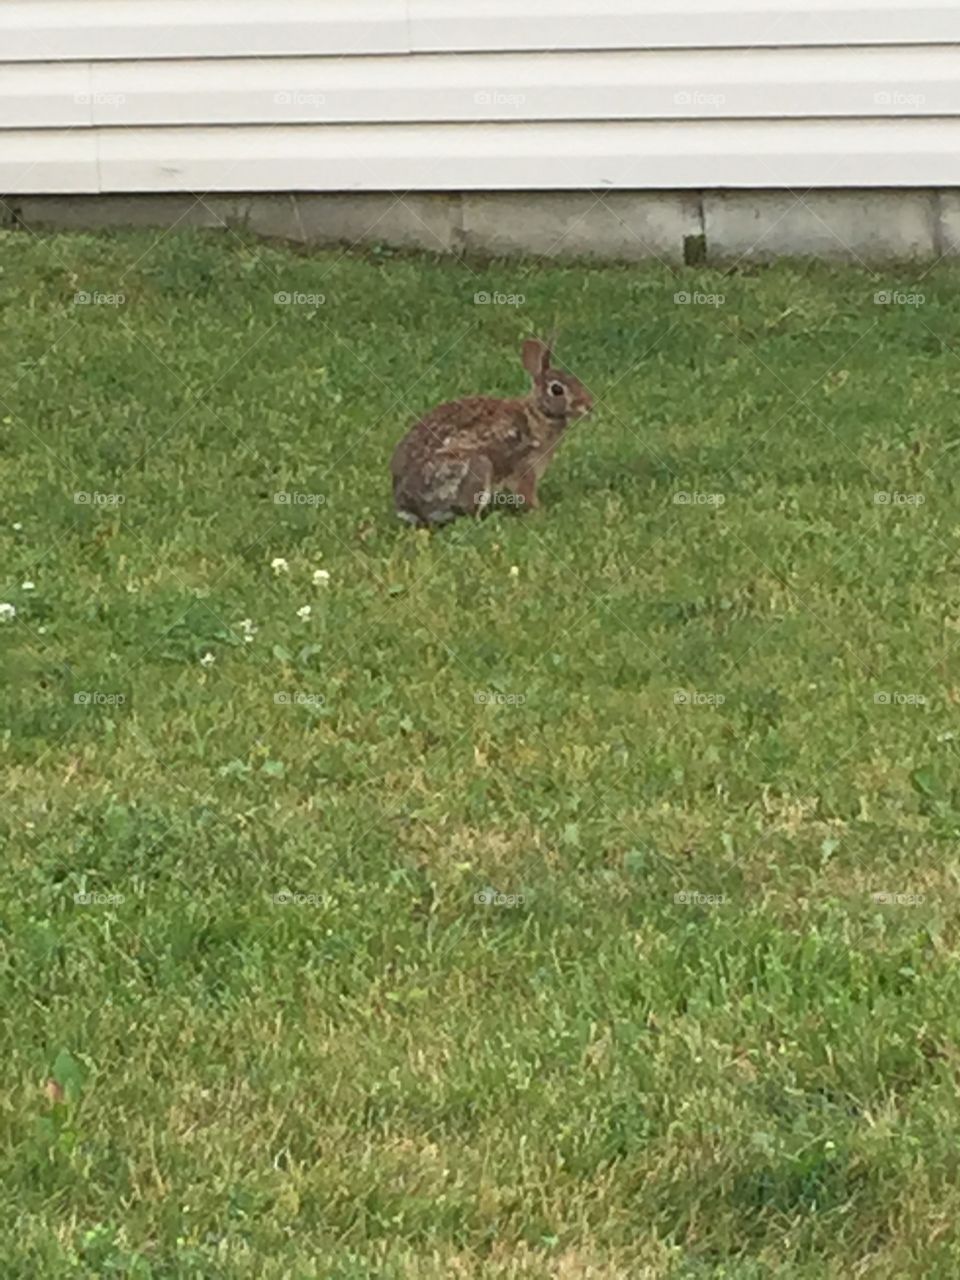 Rabbit in the grass. A brown rabbit sitting in the grass.